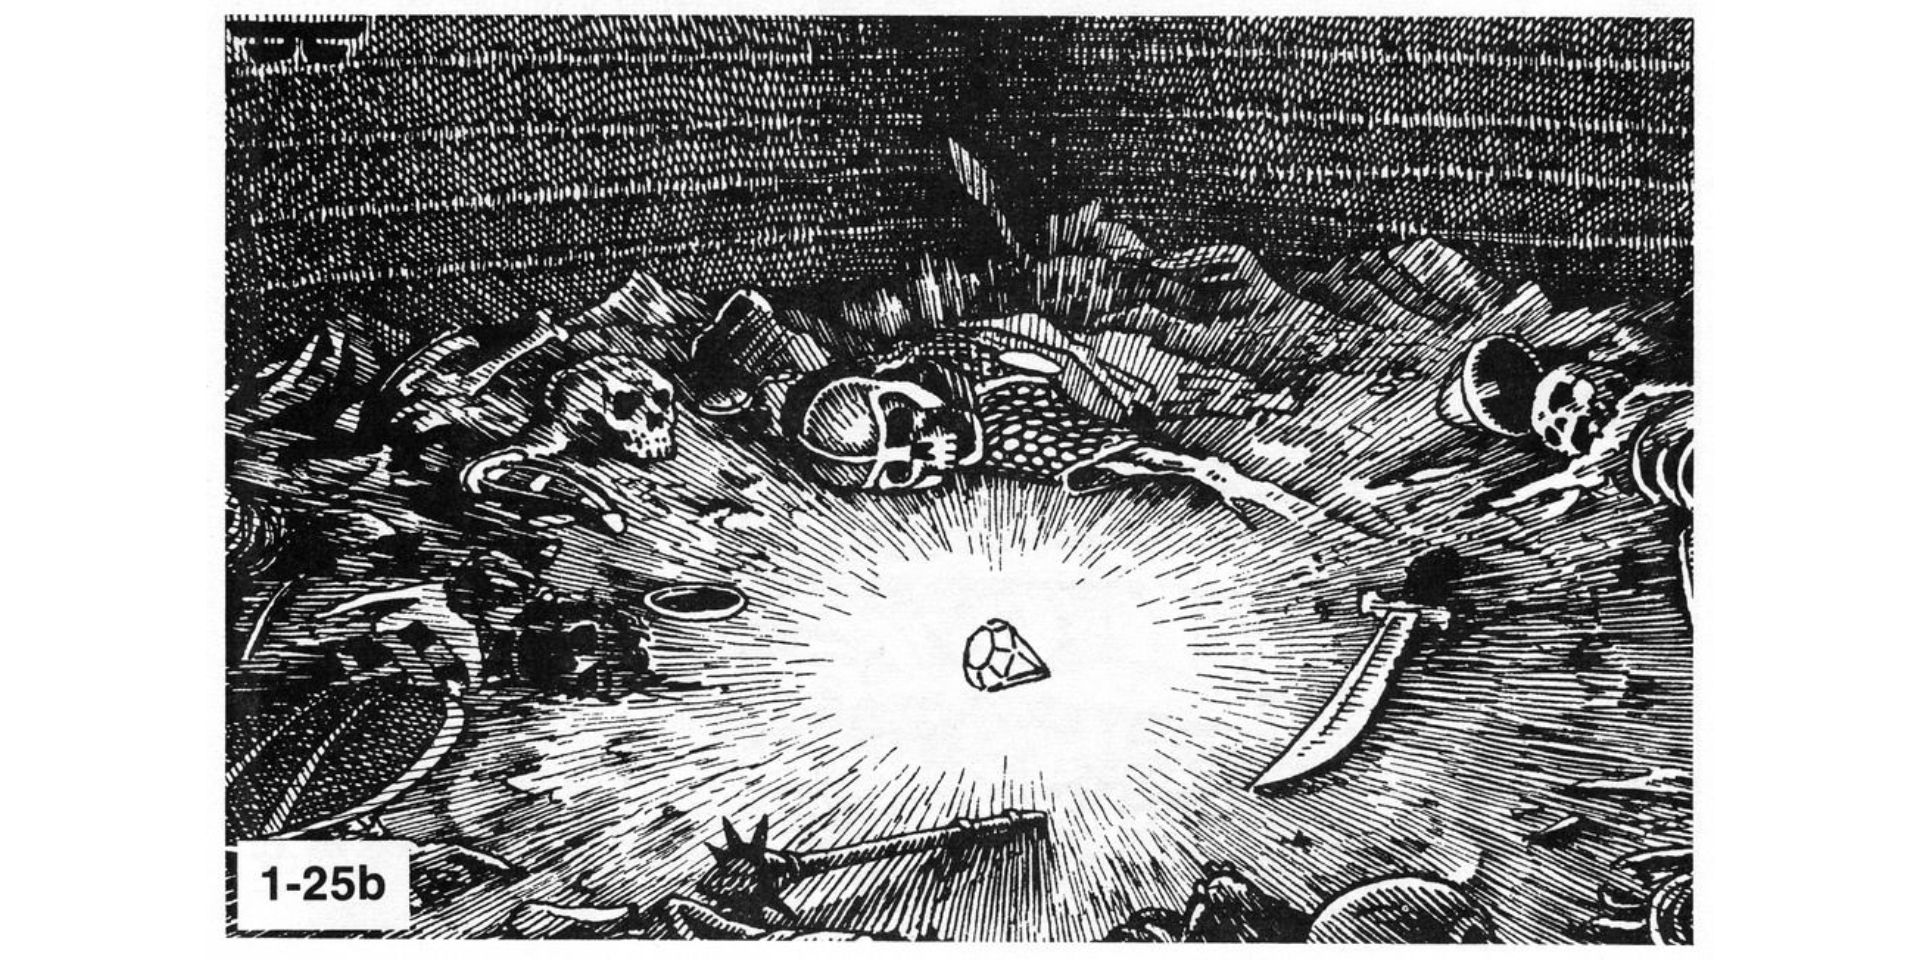 An illustration of the Trustworthy Jewel from Tomb of Horrors - a cut gem lying on the floor of a dungeon surrounded by skeletons.